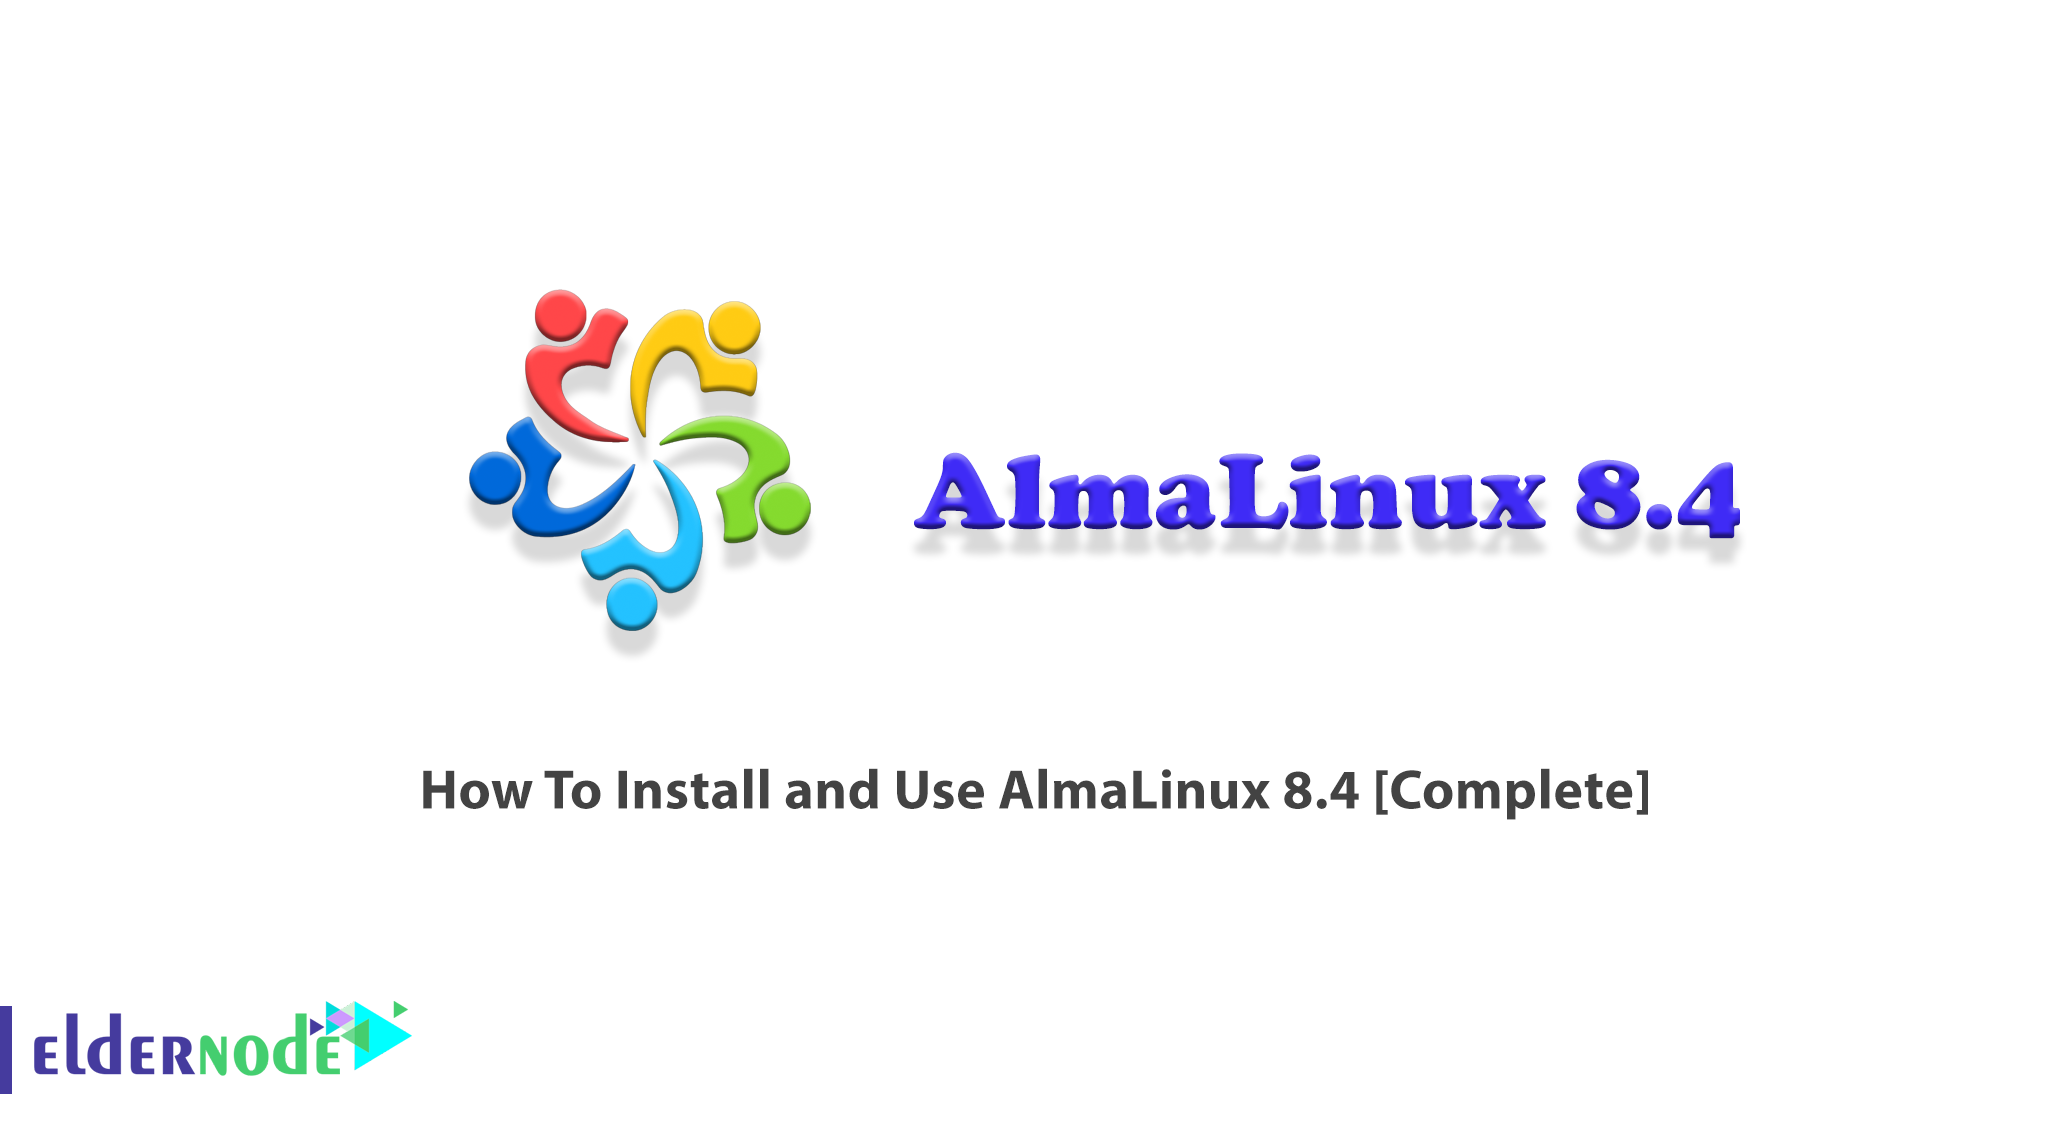 How To Install and Use AlmaLinux 8.4 [Complete]